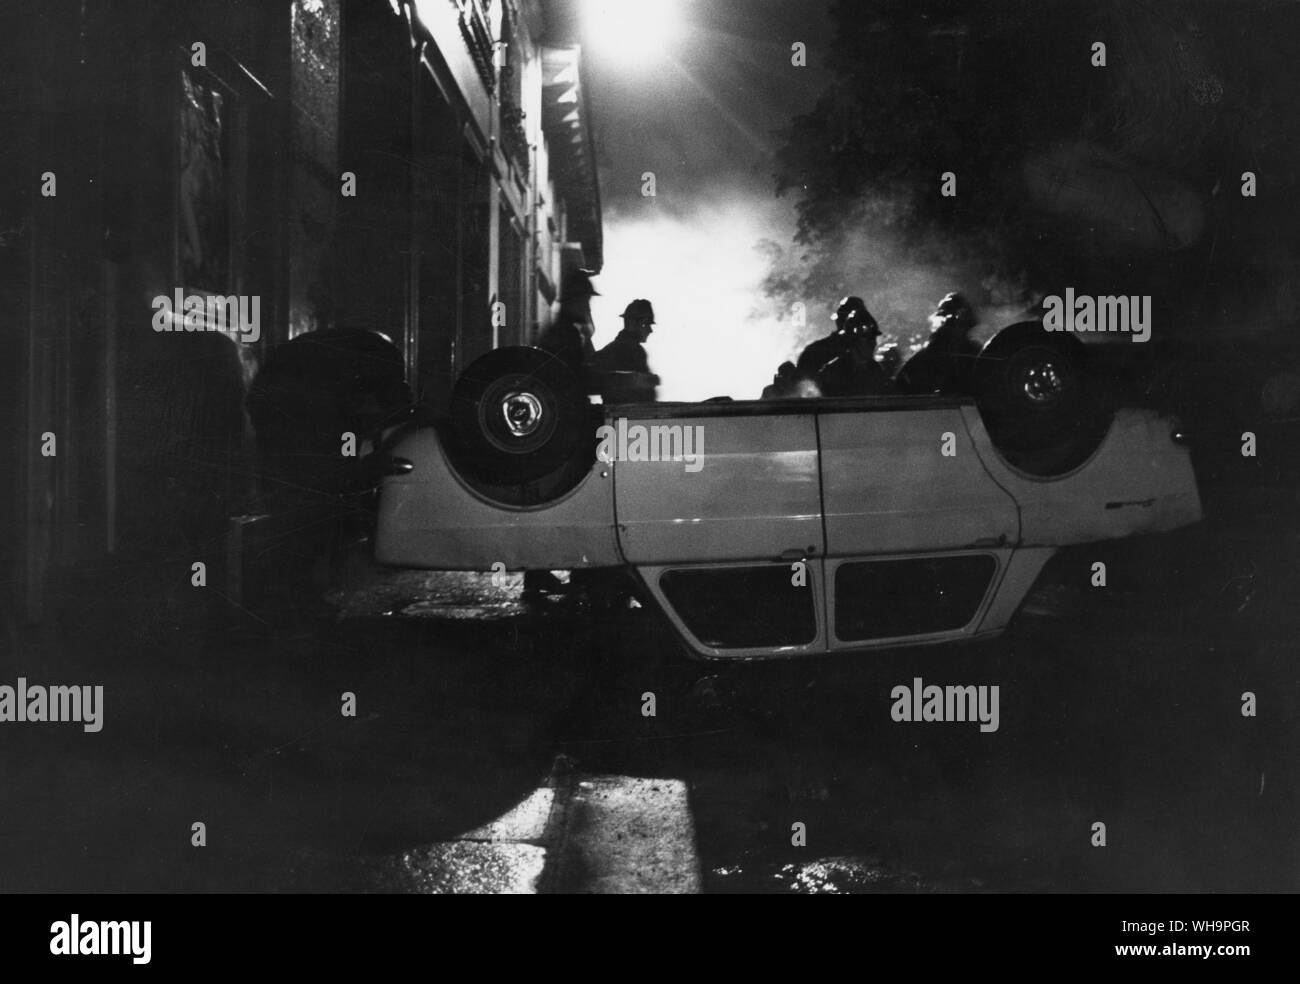 25th May 1968: Paris Riots. Police are ordered to get even tougher by French Prime Minister, Georges Pompidou in a desperate attempt to restore order in Paris. The students are rioting. Stock Photo